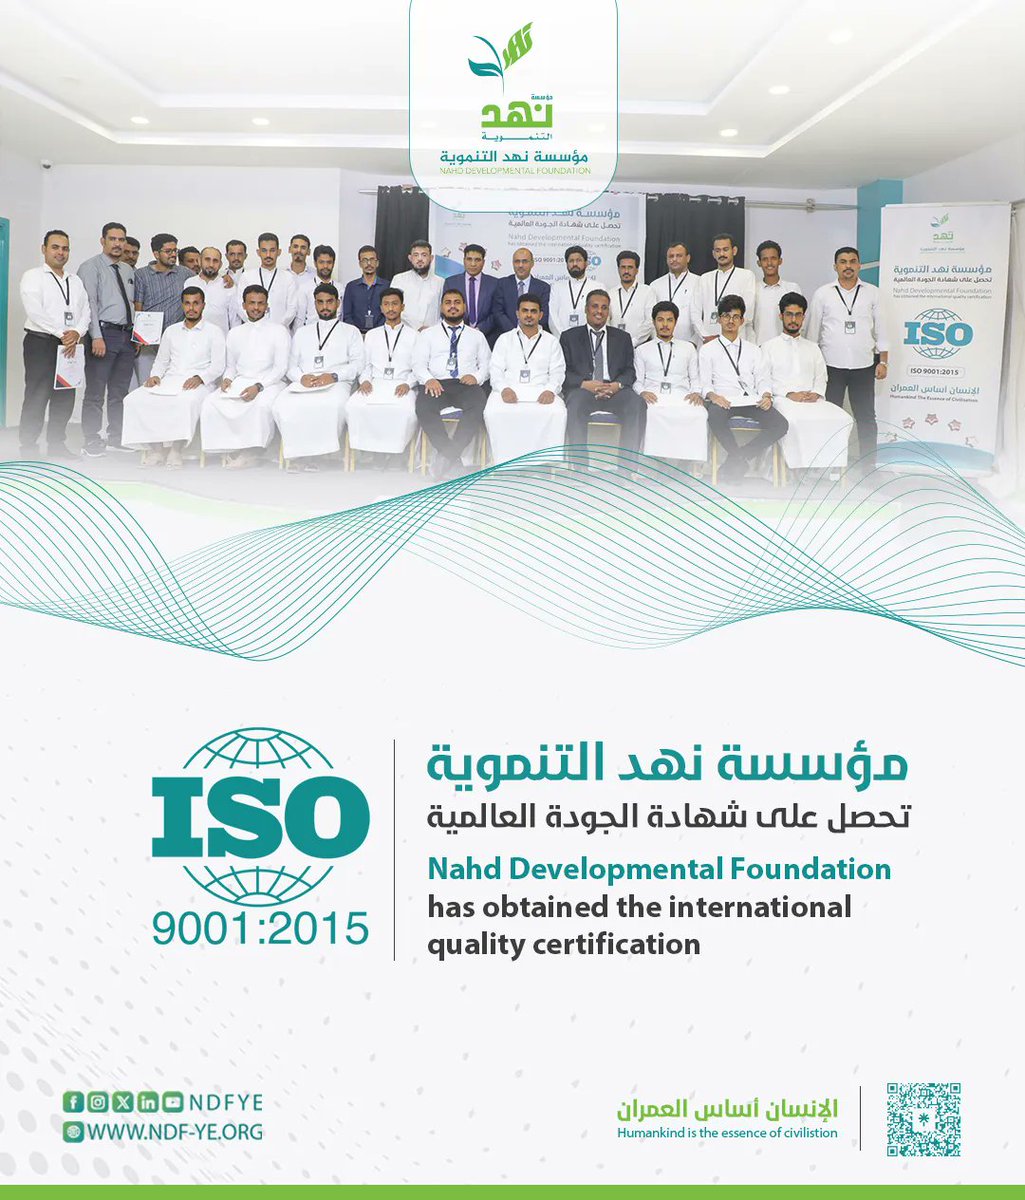 Nahd Developmental Foundation (NDF) has been awarded the ISO 9001:2015 certification, recognizing NDF’s commitment to excellence in humanitarian and developmental services.

#NDF